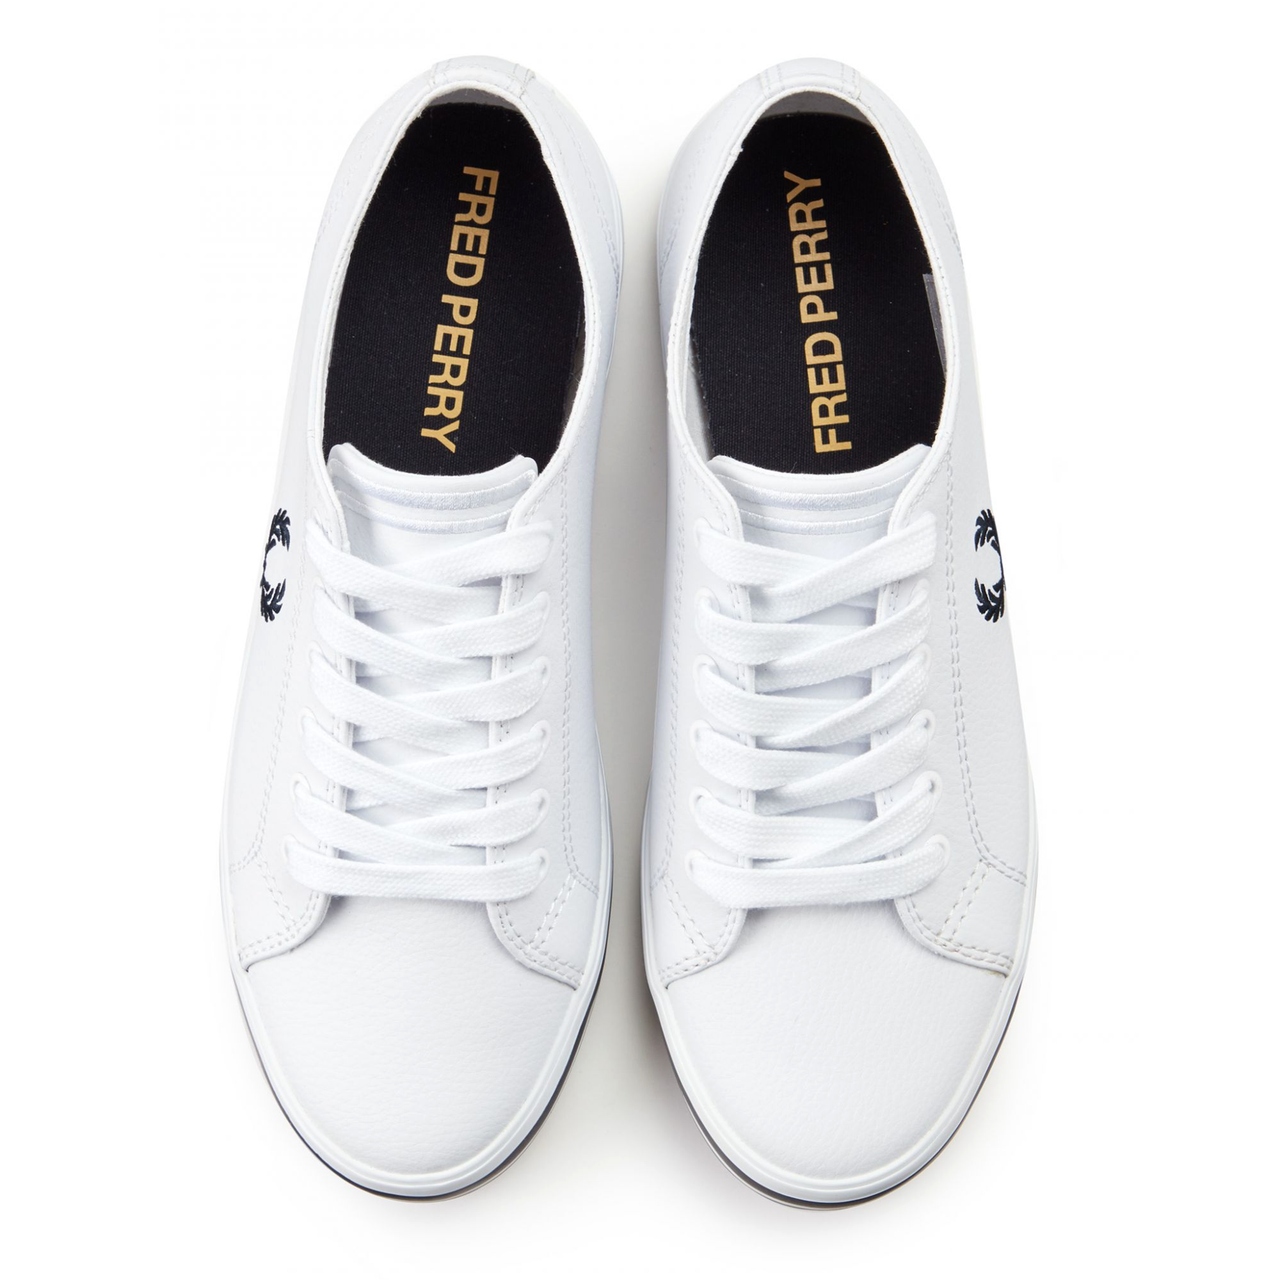 FRED PERRY KINGSTON LEATHER TENNIS SHOES